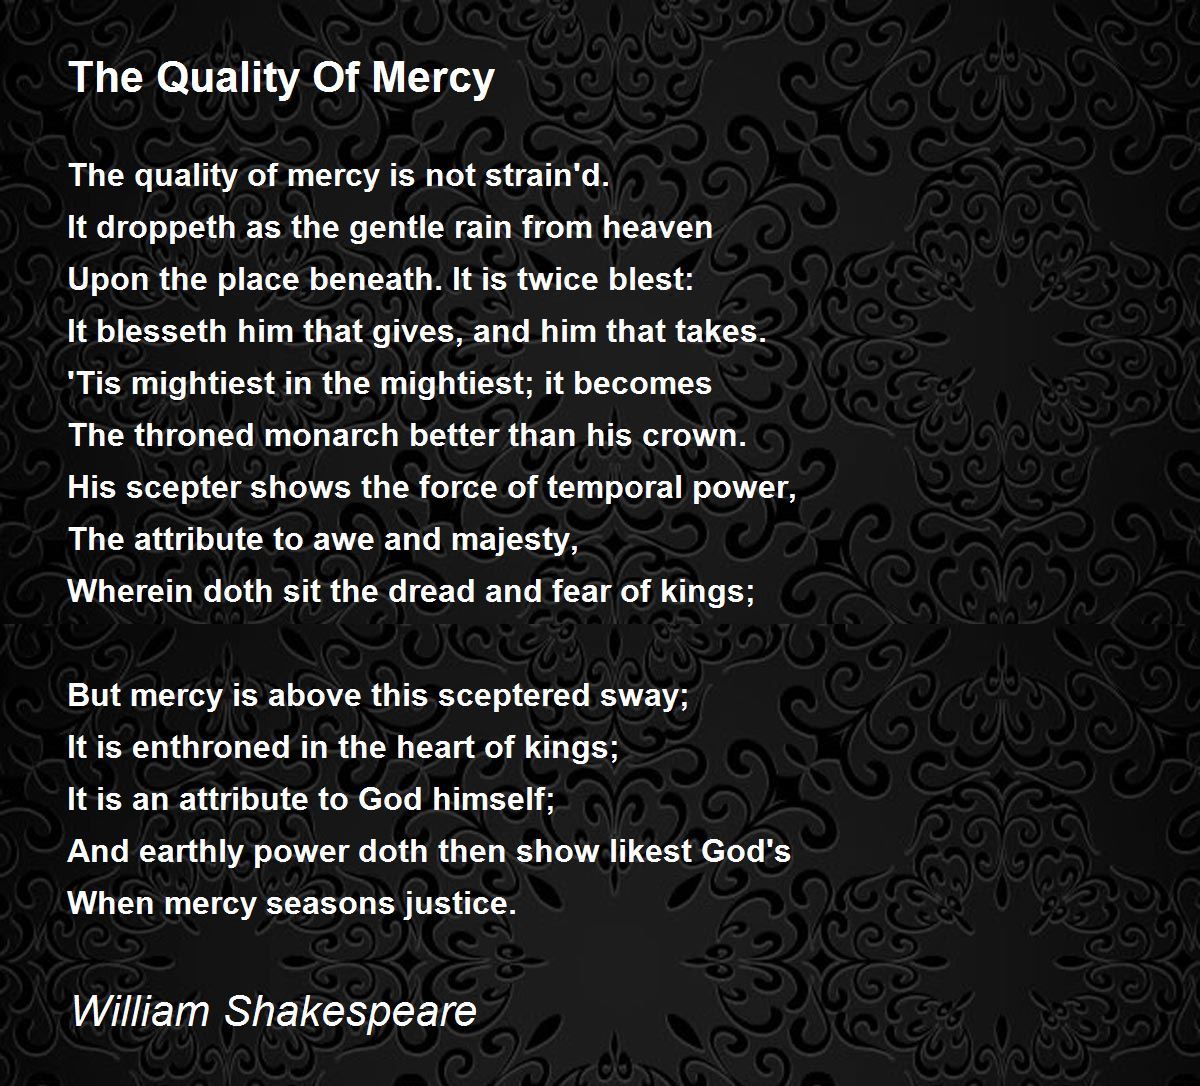 The Quality Of Mercy by William Shakespeare - The Quality Of Mercy Poem.